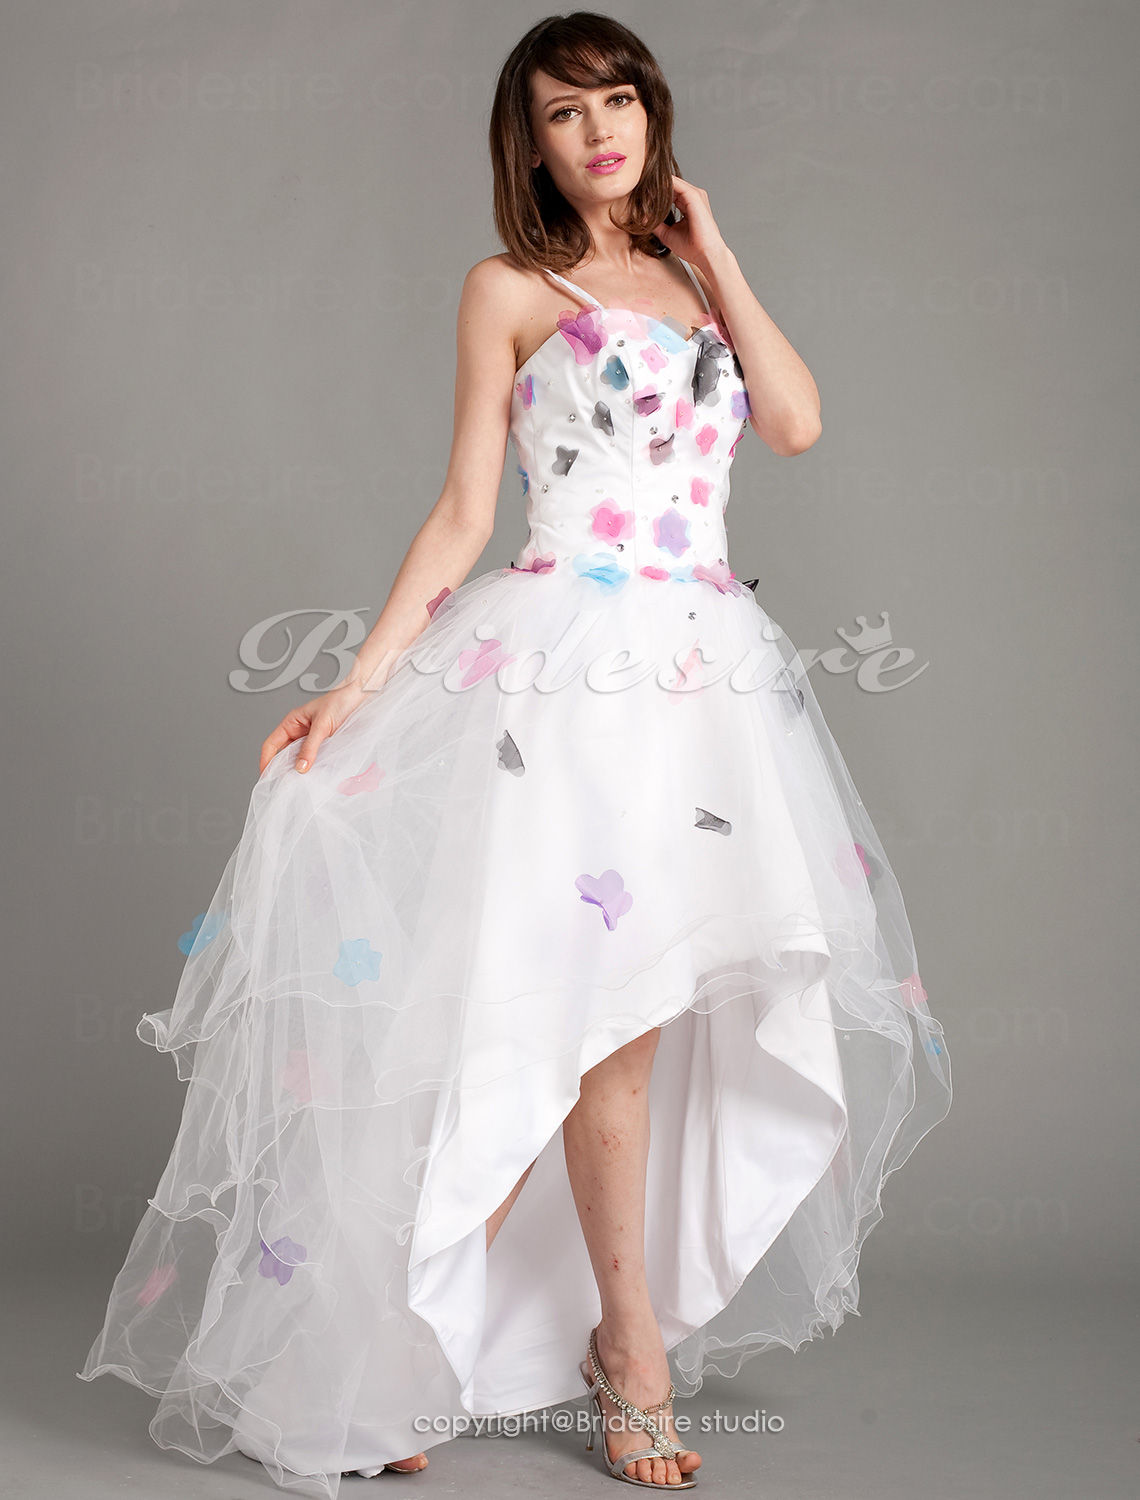 A-line Asymmetrical Sweetheart Tulle Short/Mini Evening Dress With Flower(s)